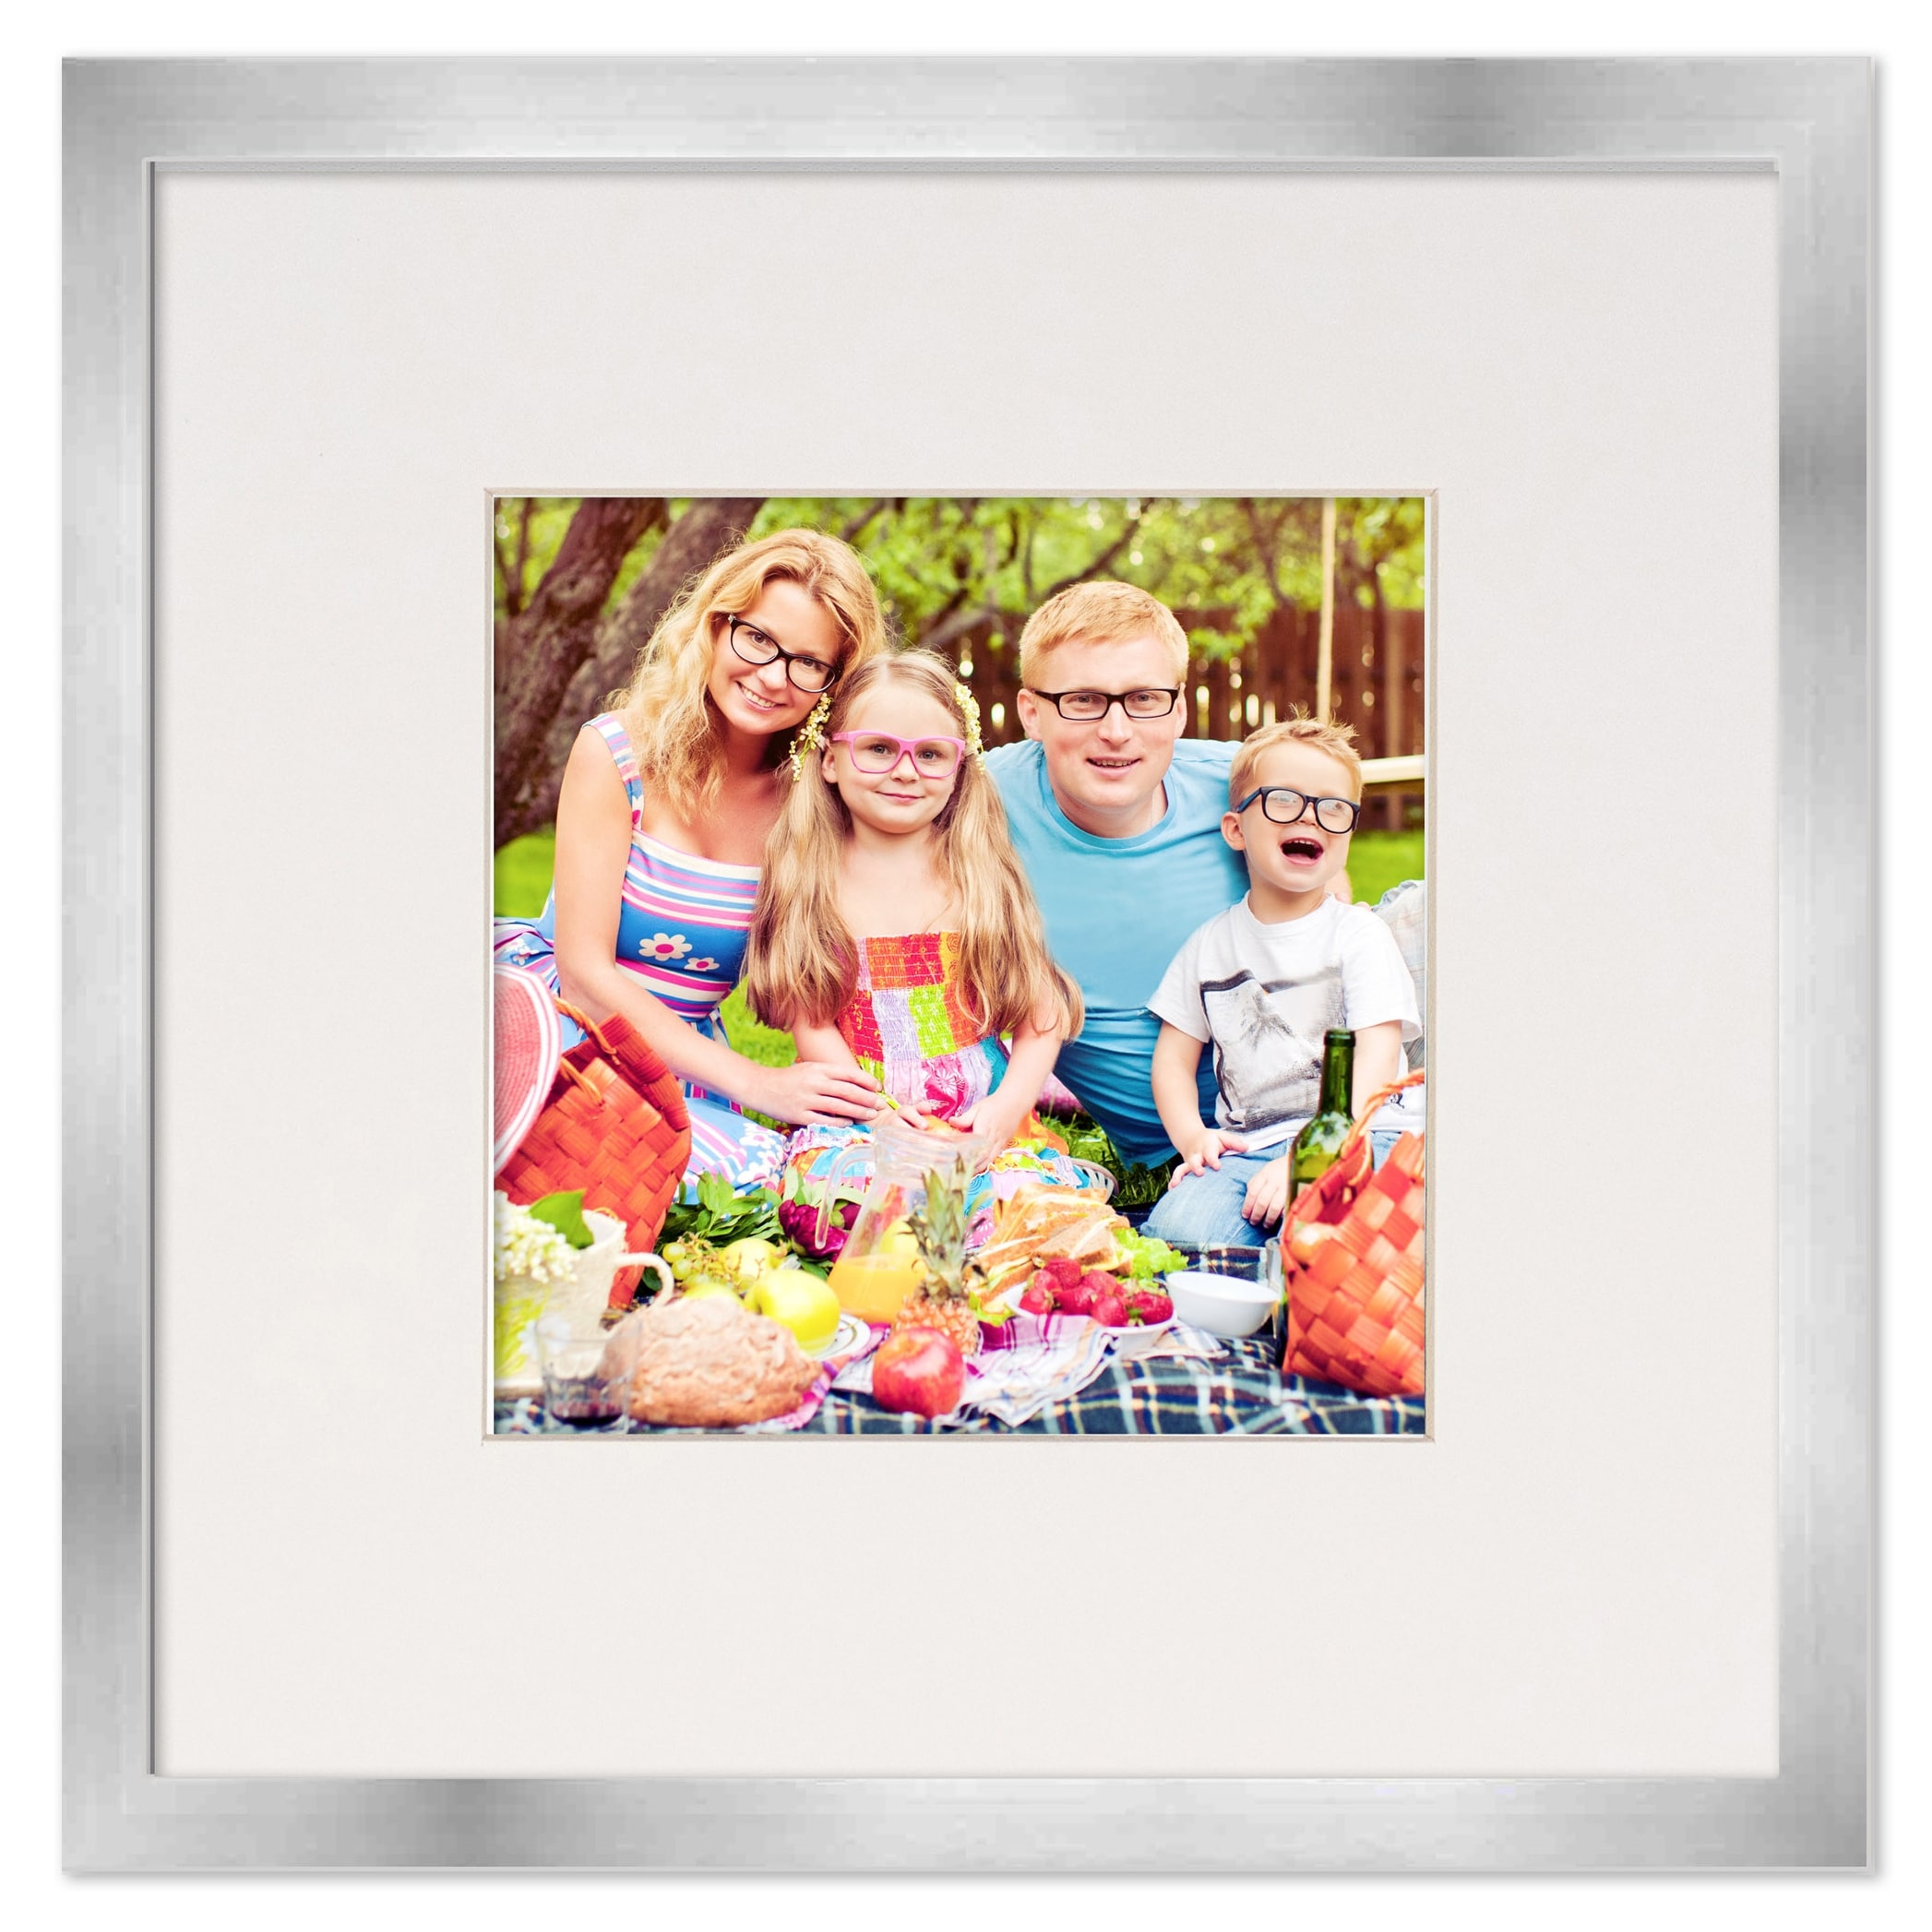 8x8 Frame with Mat - White 11x11 Frame Wood Made to Display Print